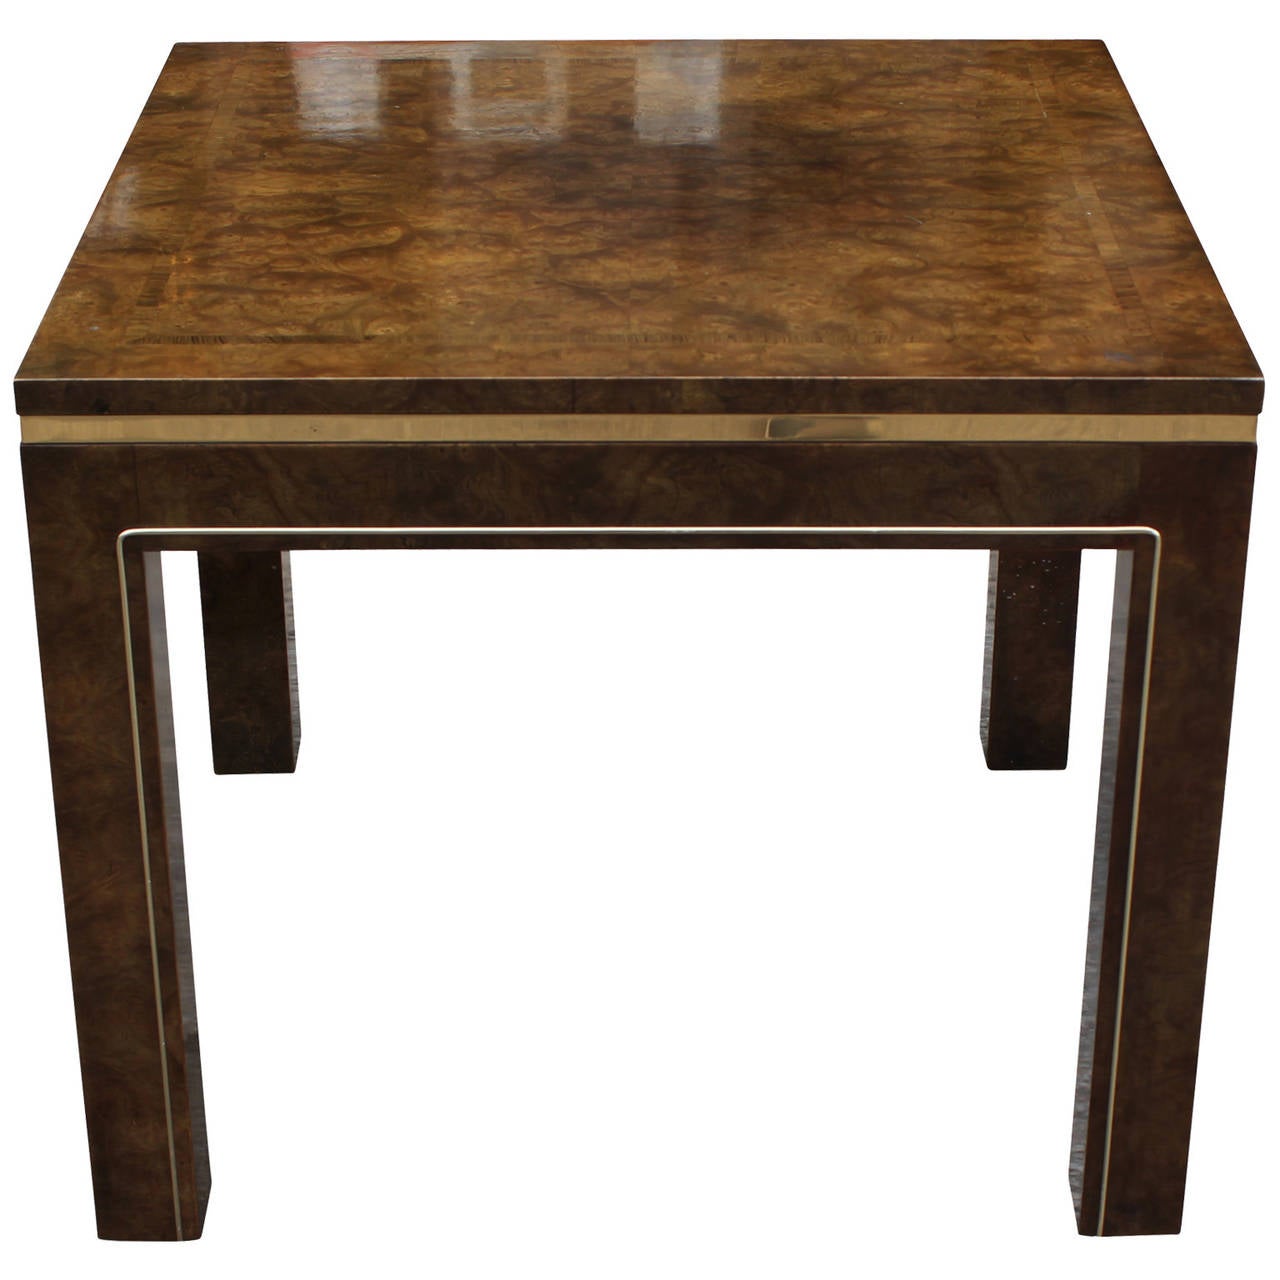 Great Mastercraft burl and brass parson style table. Table could be used as a side table or occasional table.